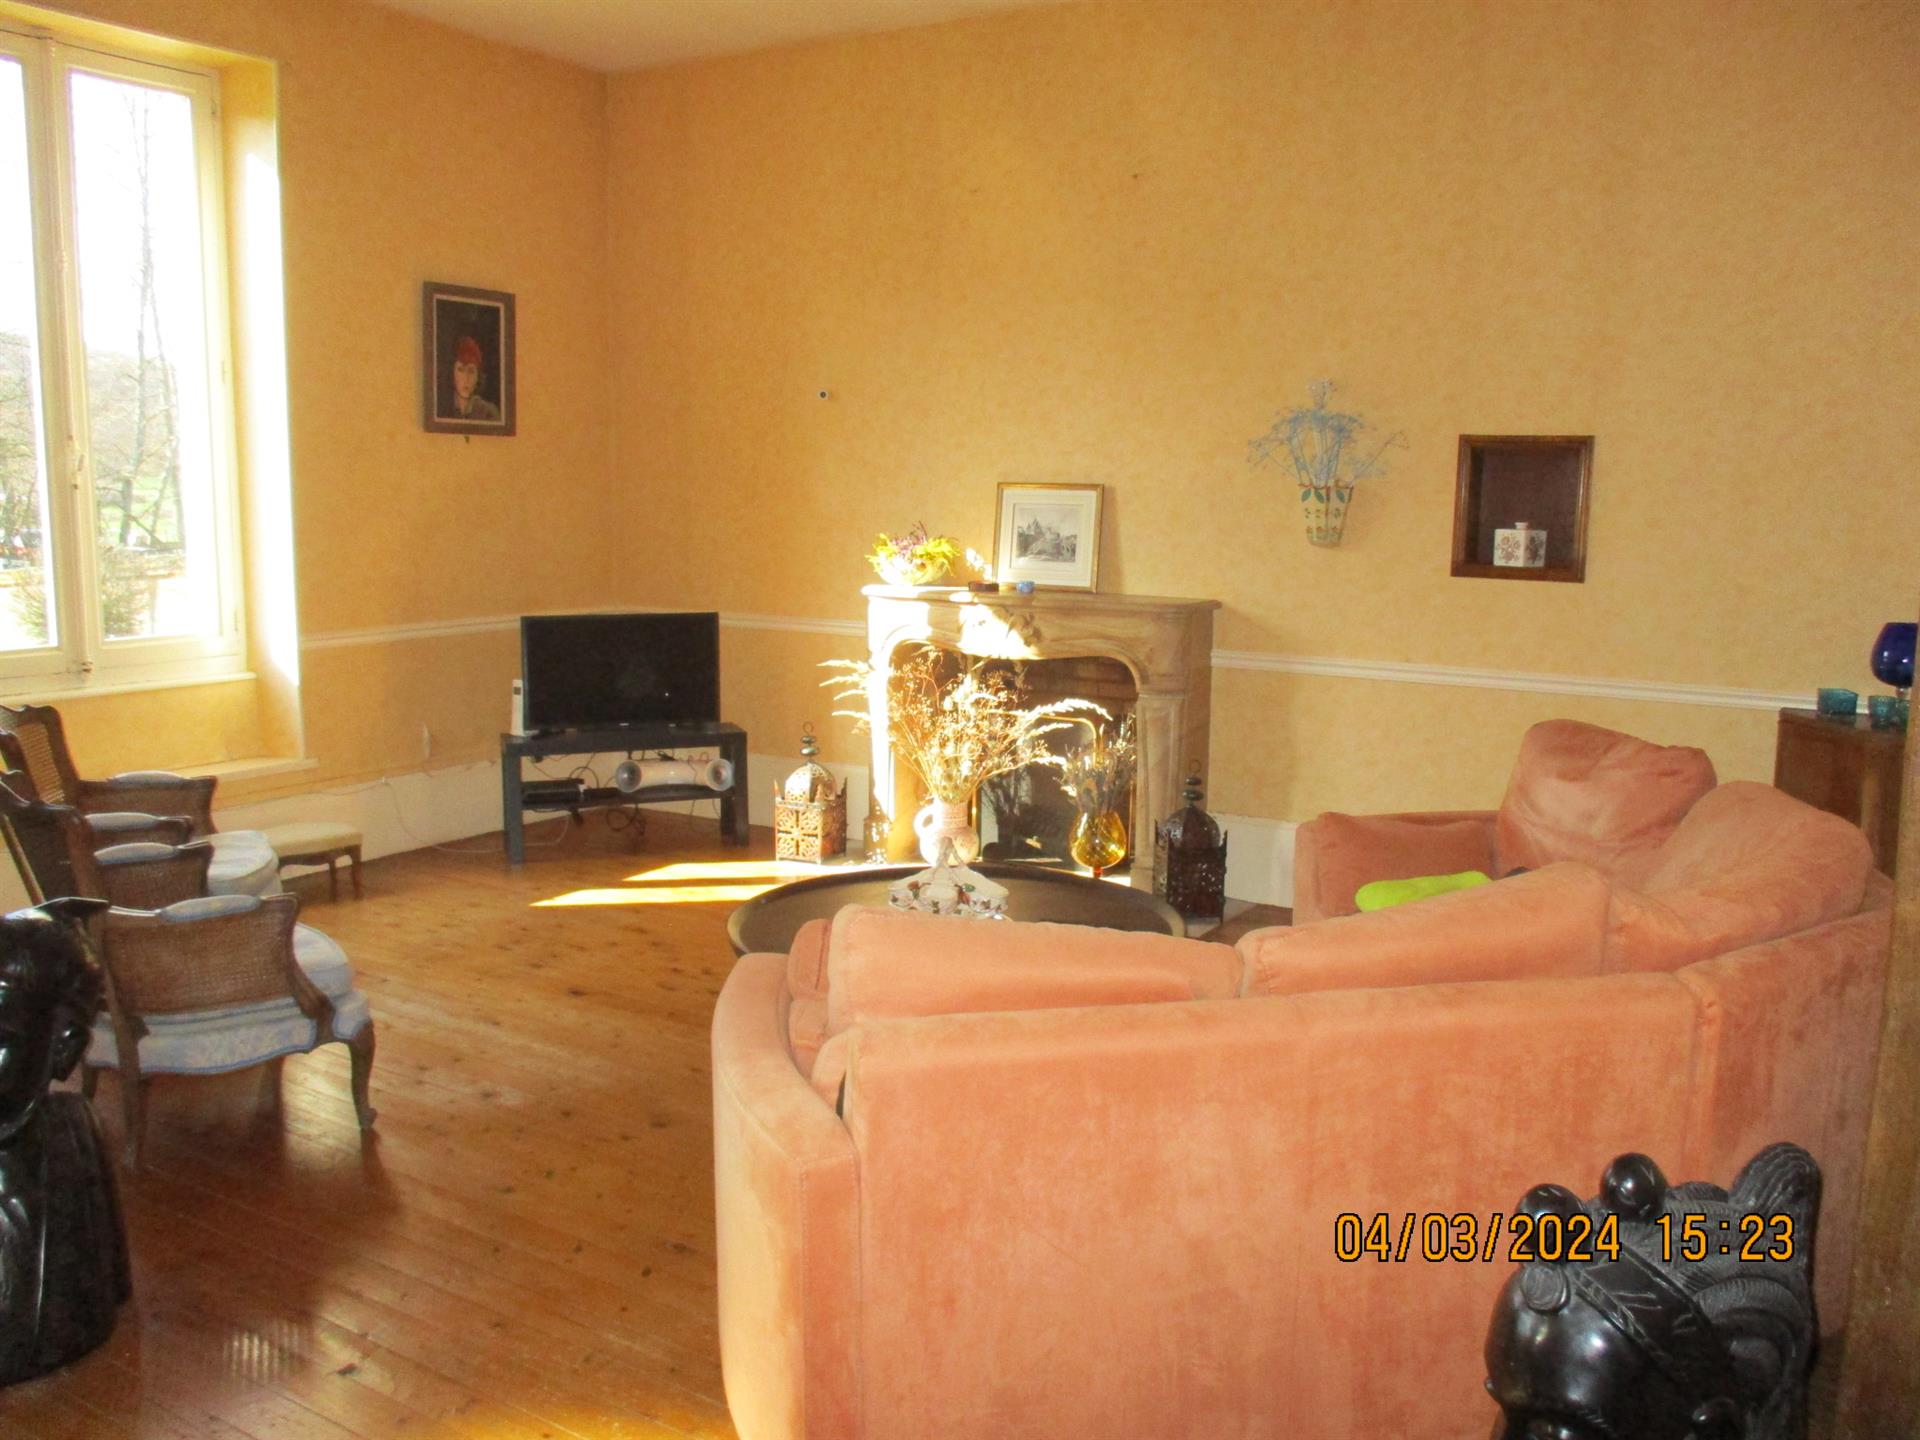 Near Arnayd-le-Duc, Pleasure property with outbuildings and pleasure garden,